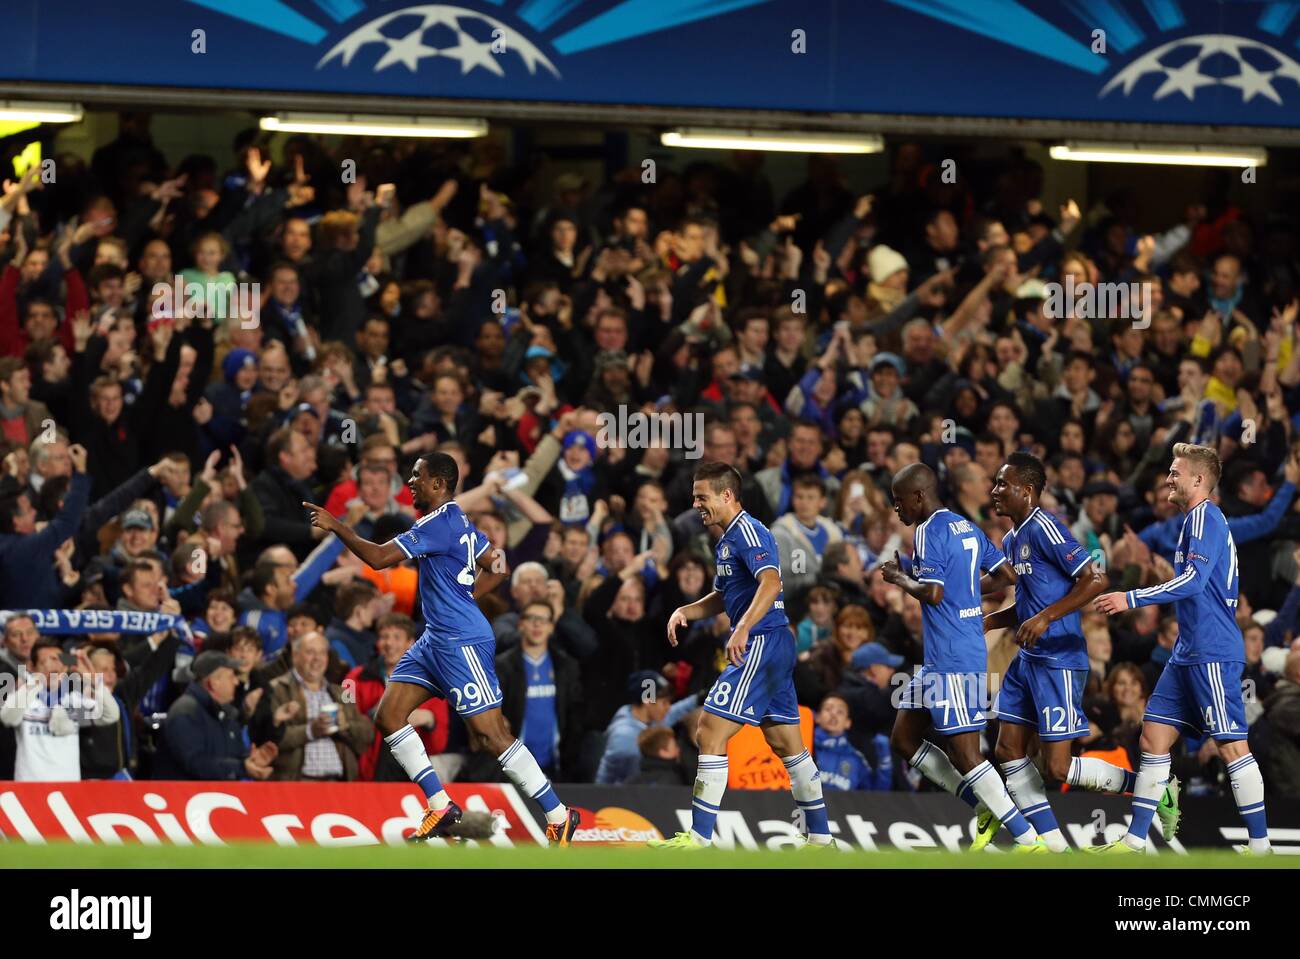 London, Britain. 06th Nov, 2013. Samuel Eto'o (L) of Chelsea celebrates his goal for 1-0 during the UEFA Champions League group E soccer match between Chelsea FC and FC Schalke 04 at Stamford Bridge Stadium in London, Britain, 06 November 2013. Photo: Friso Gentsch/dpa/Alamy Live News Stock Photo